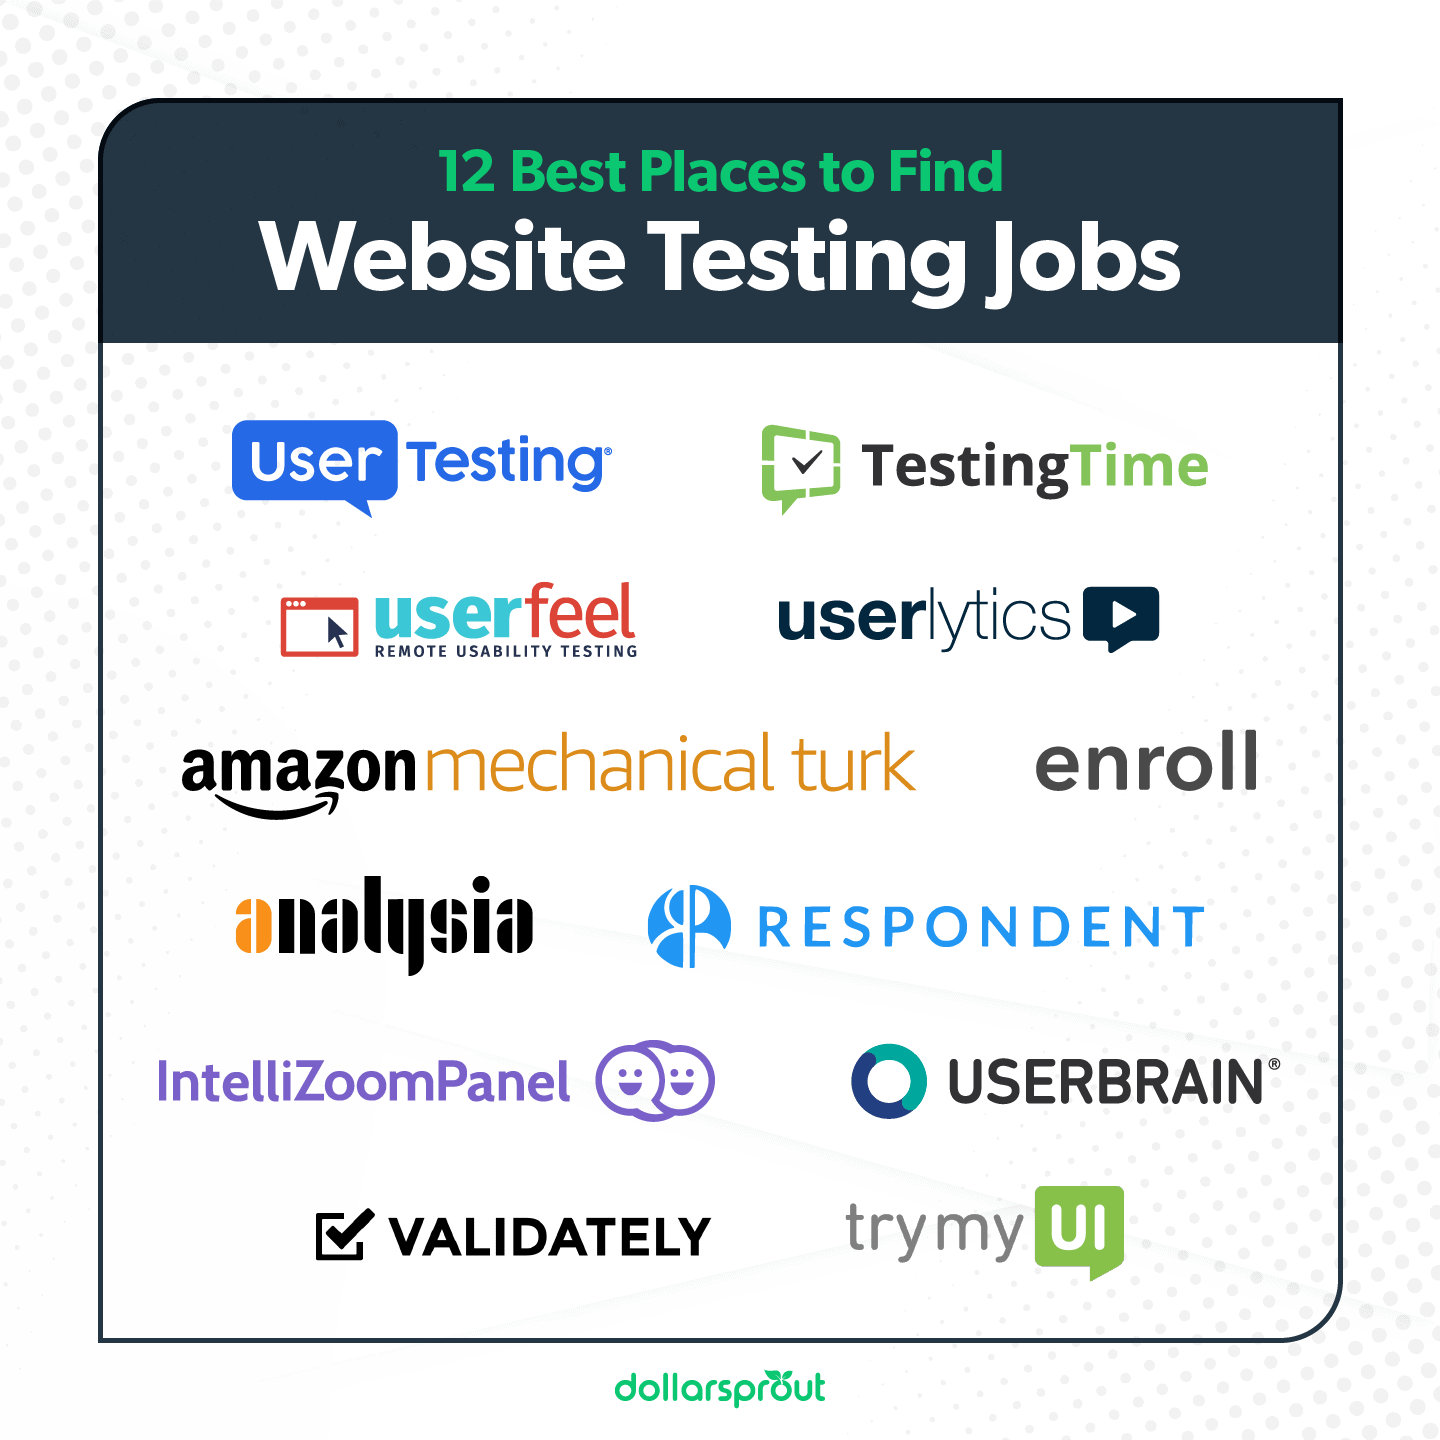 Best Places to Find Website Testing Jobs